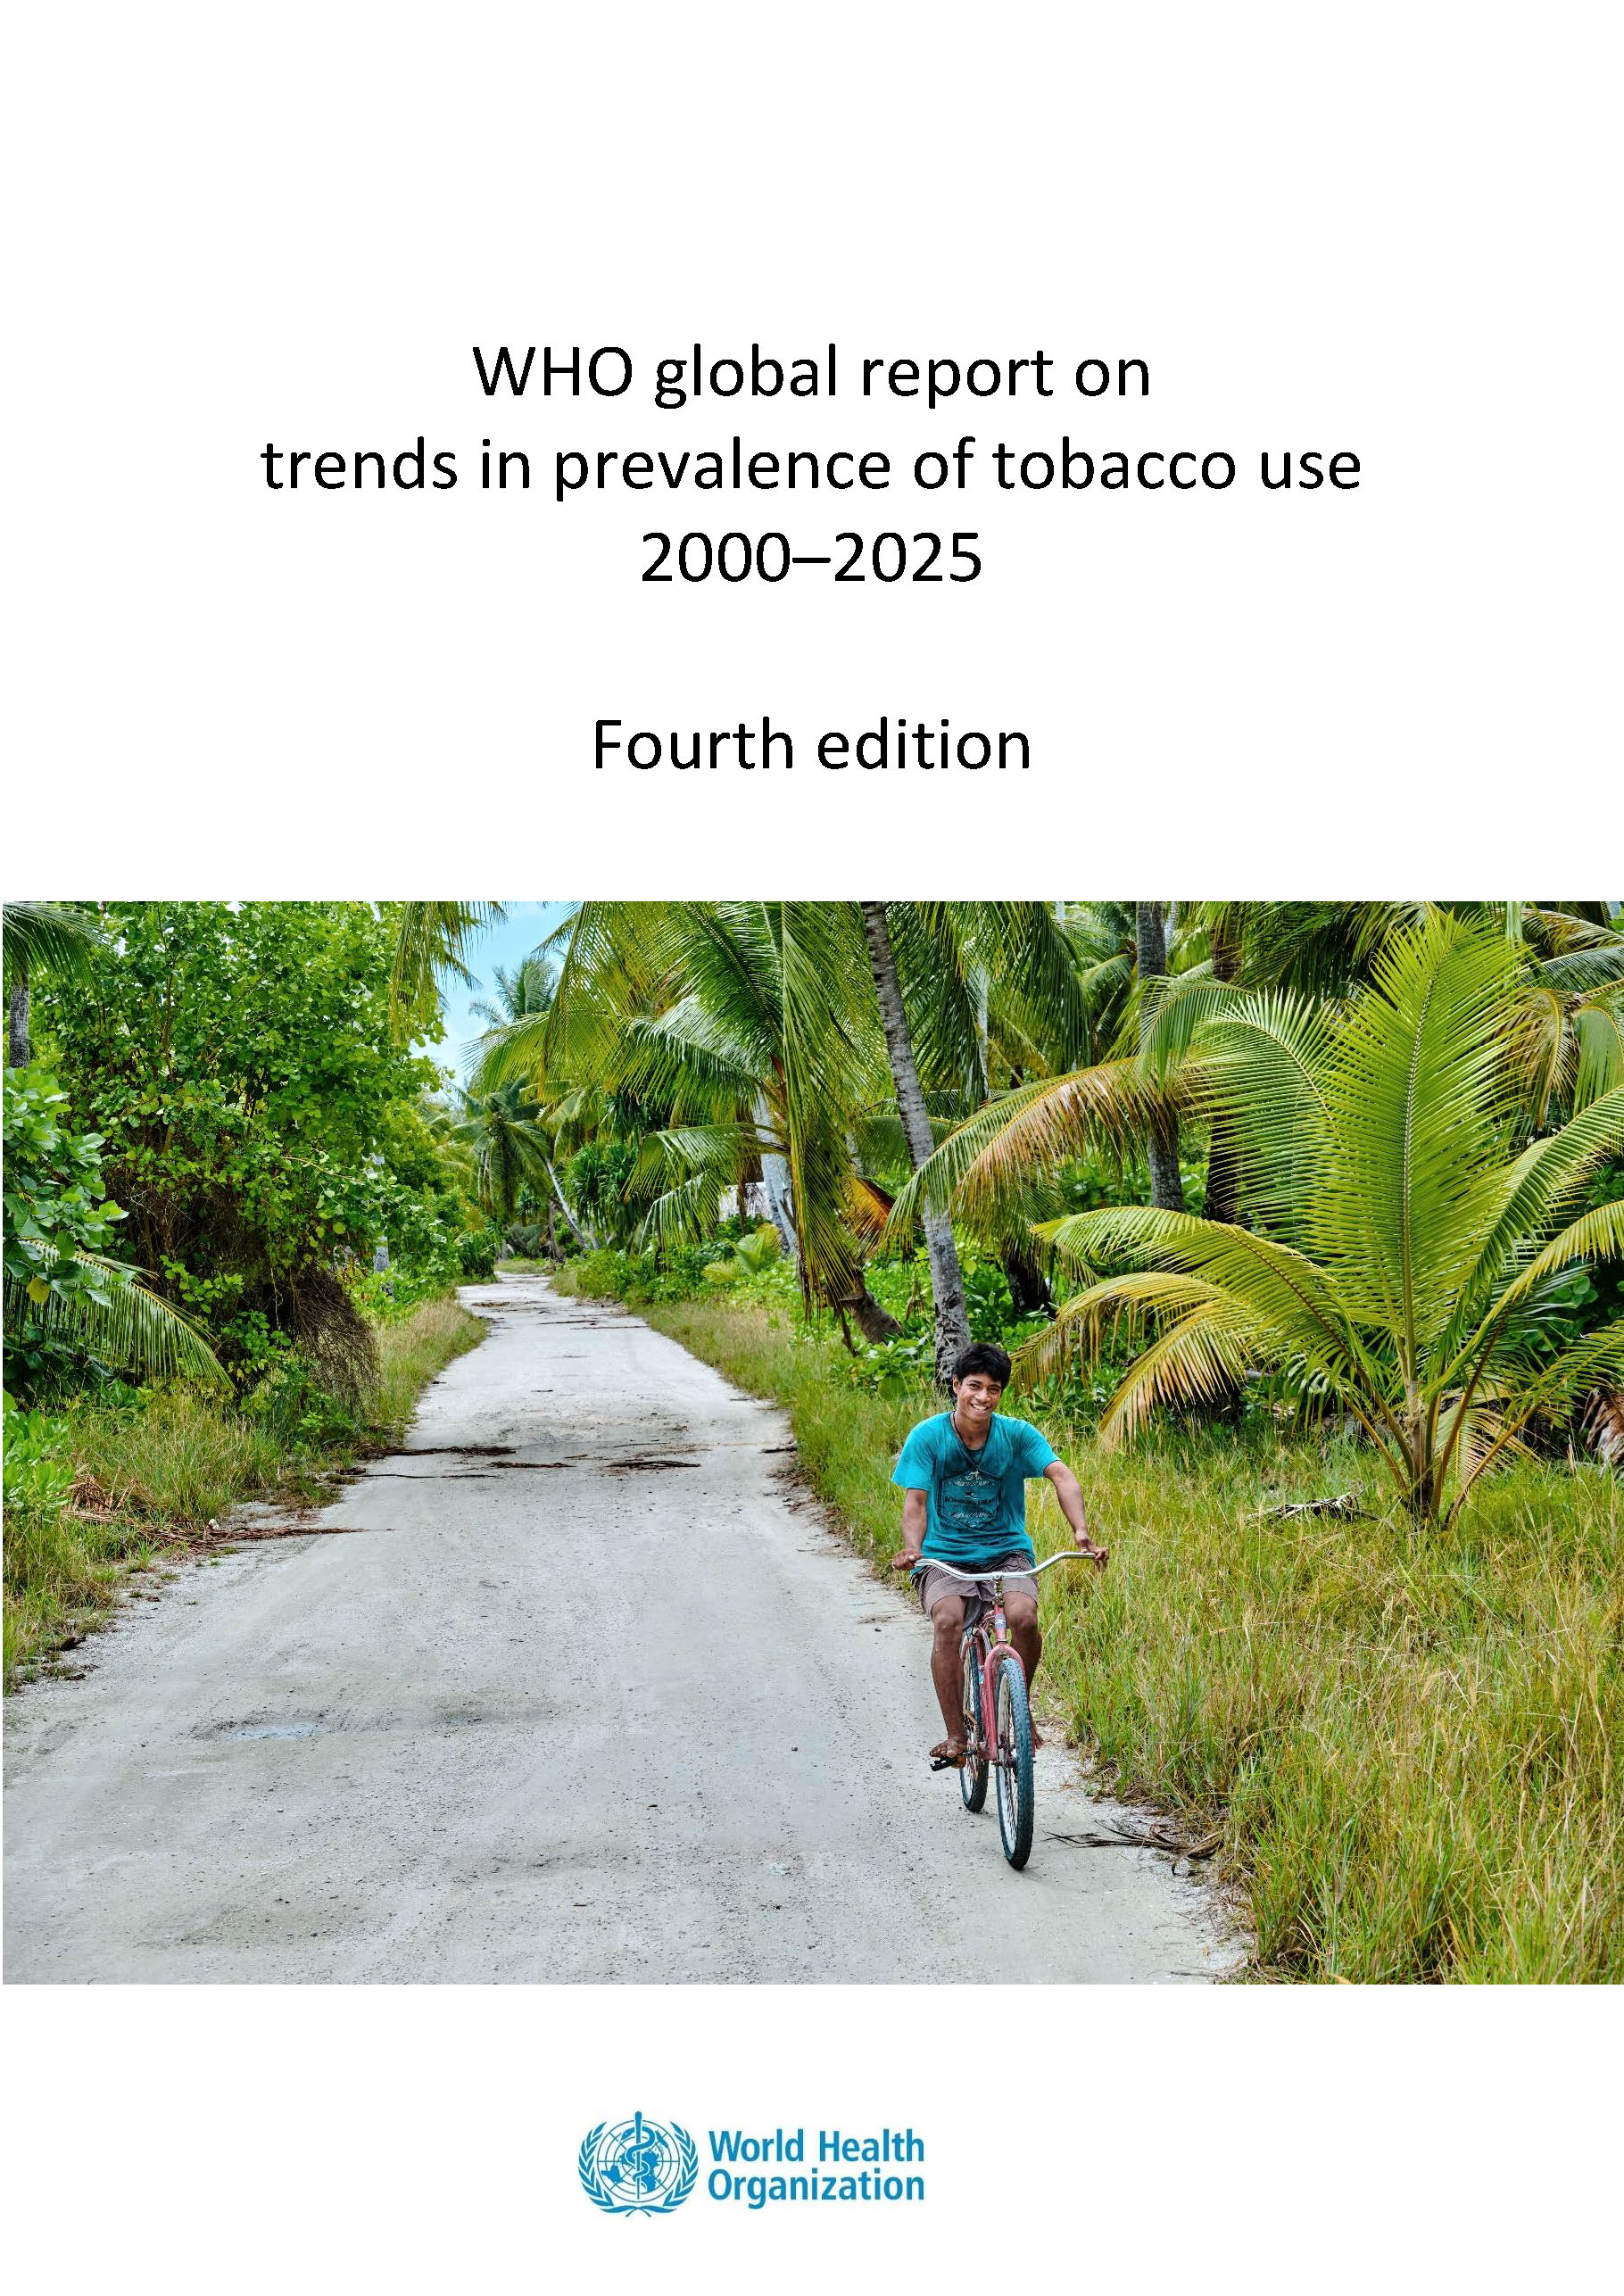 New WHO trends report shows slight decrease in tobacco use in the Region and urges countries to step up action to keep this up